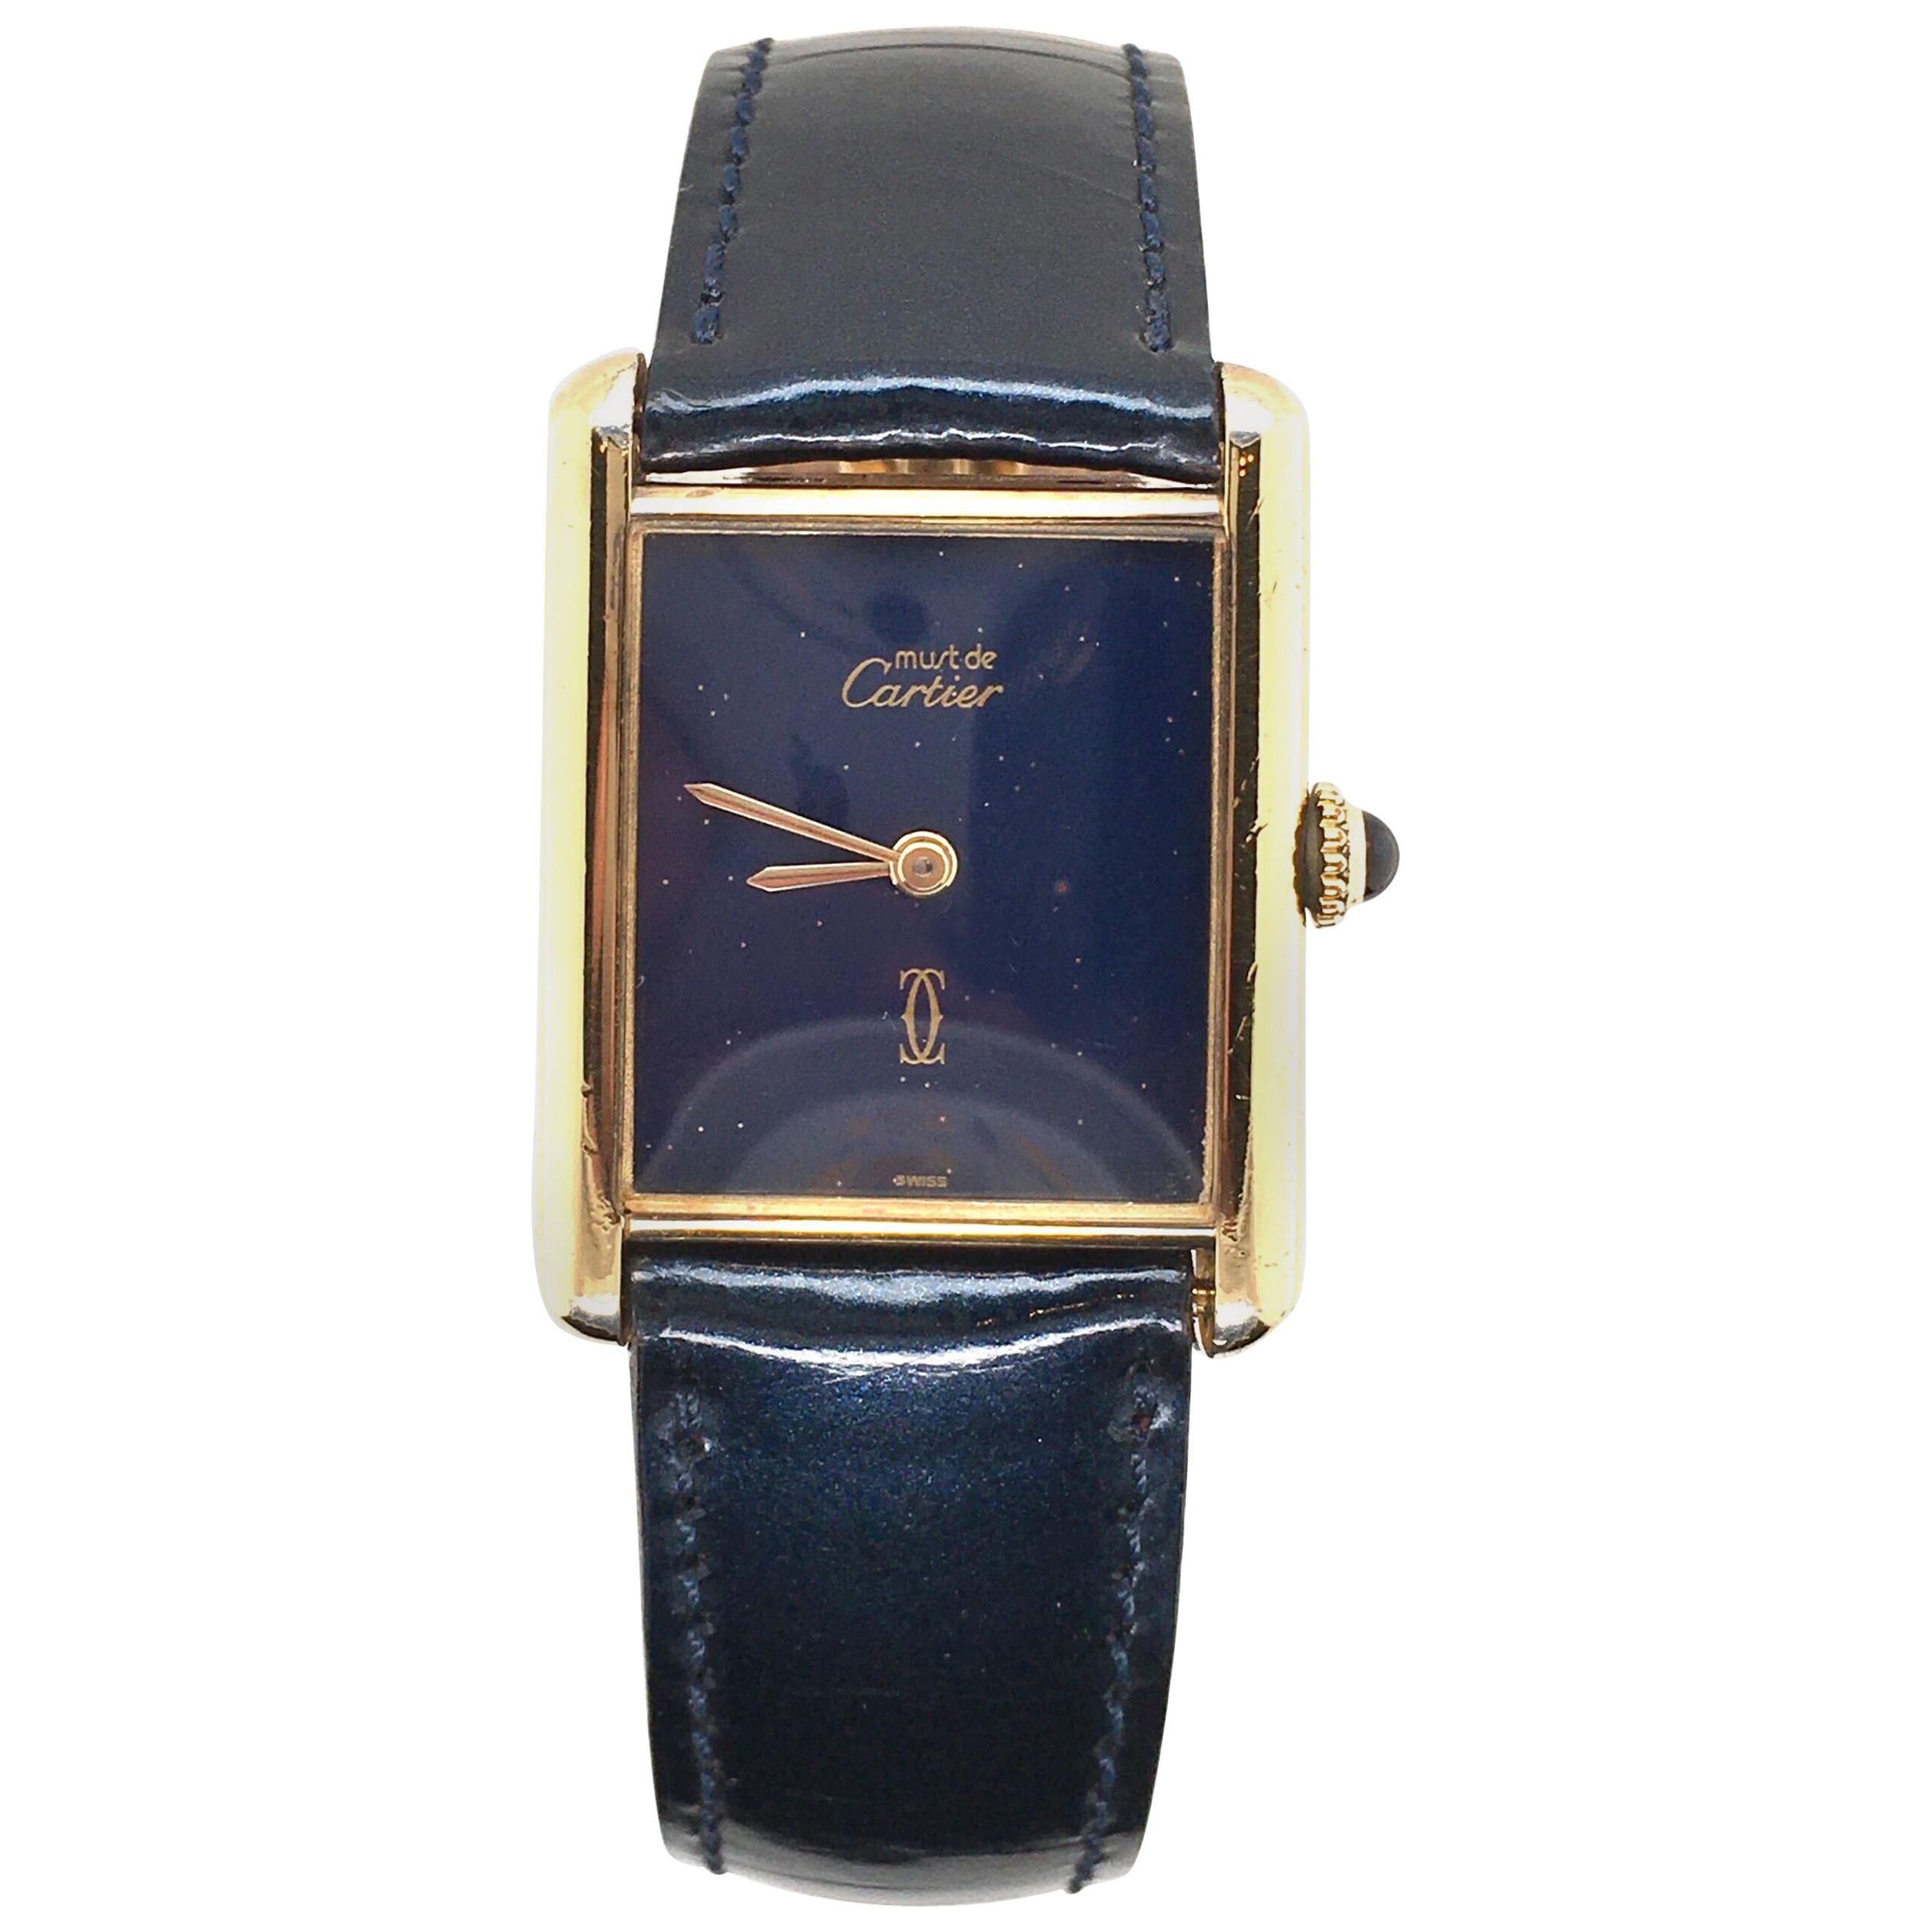 Cartier Gold-Plated Sterling Silver and Lapis Lazuli Tank Watch